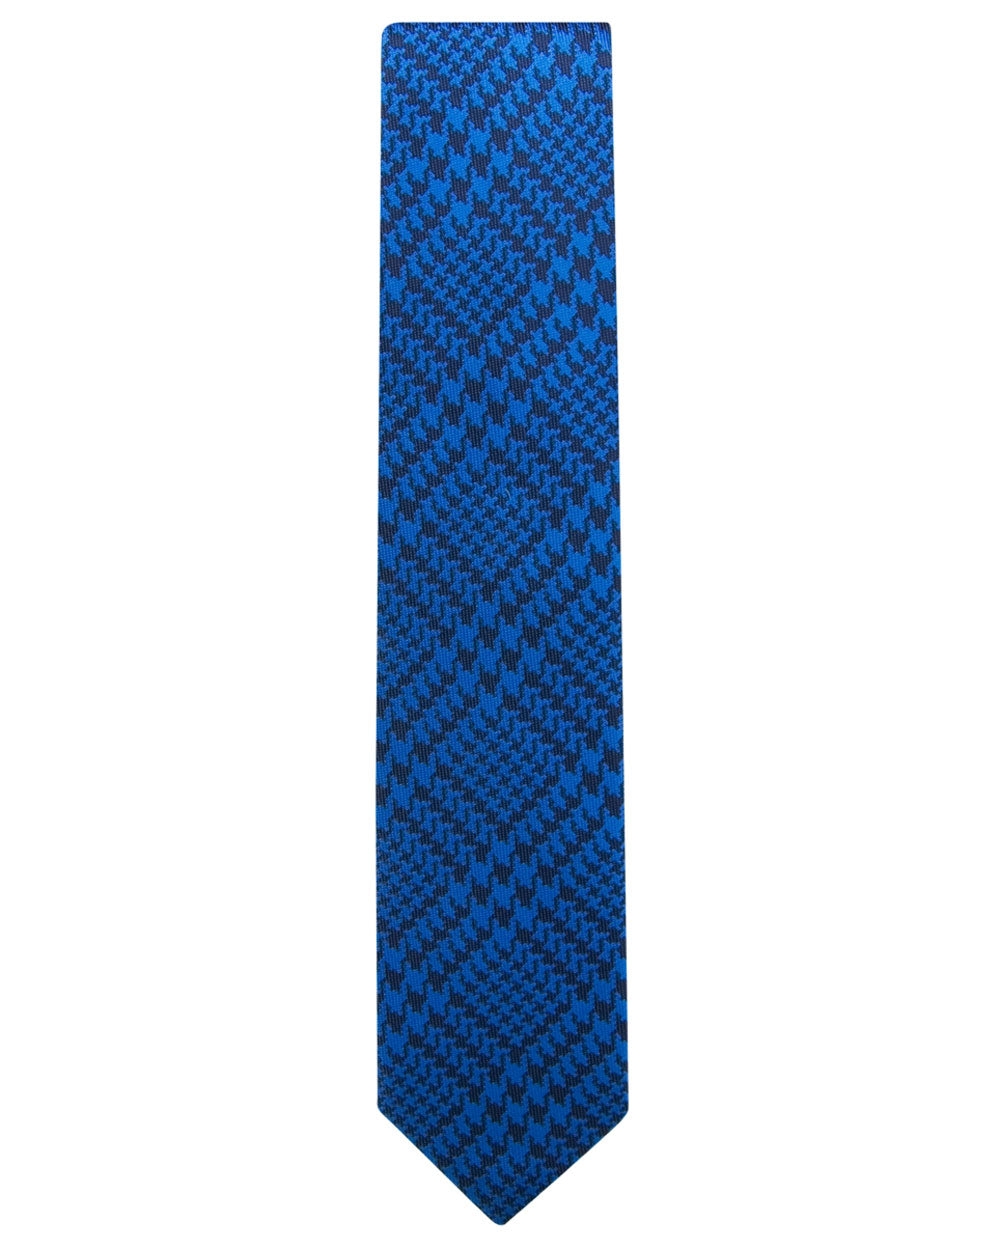 Navy and Bright Blue Houndstooth Tie